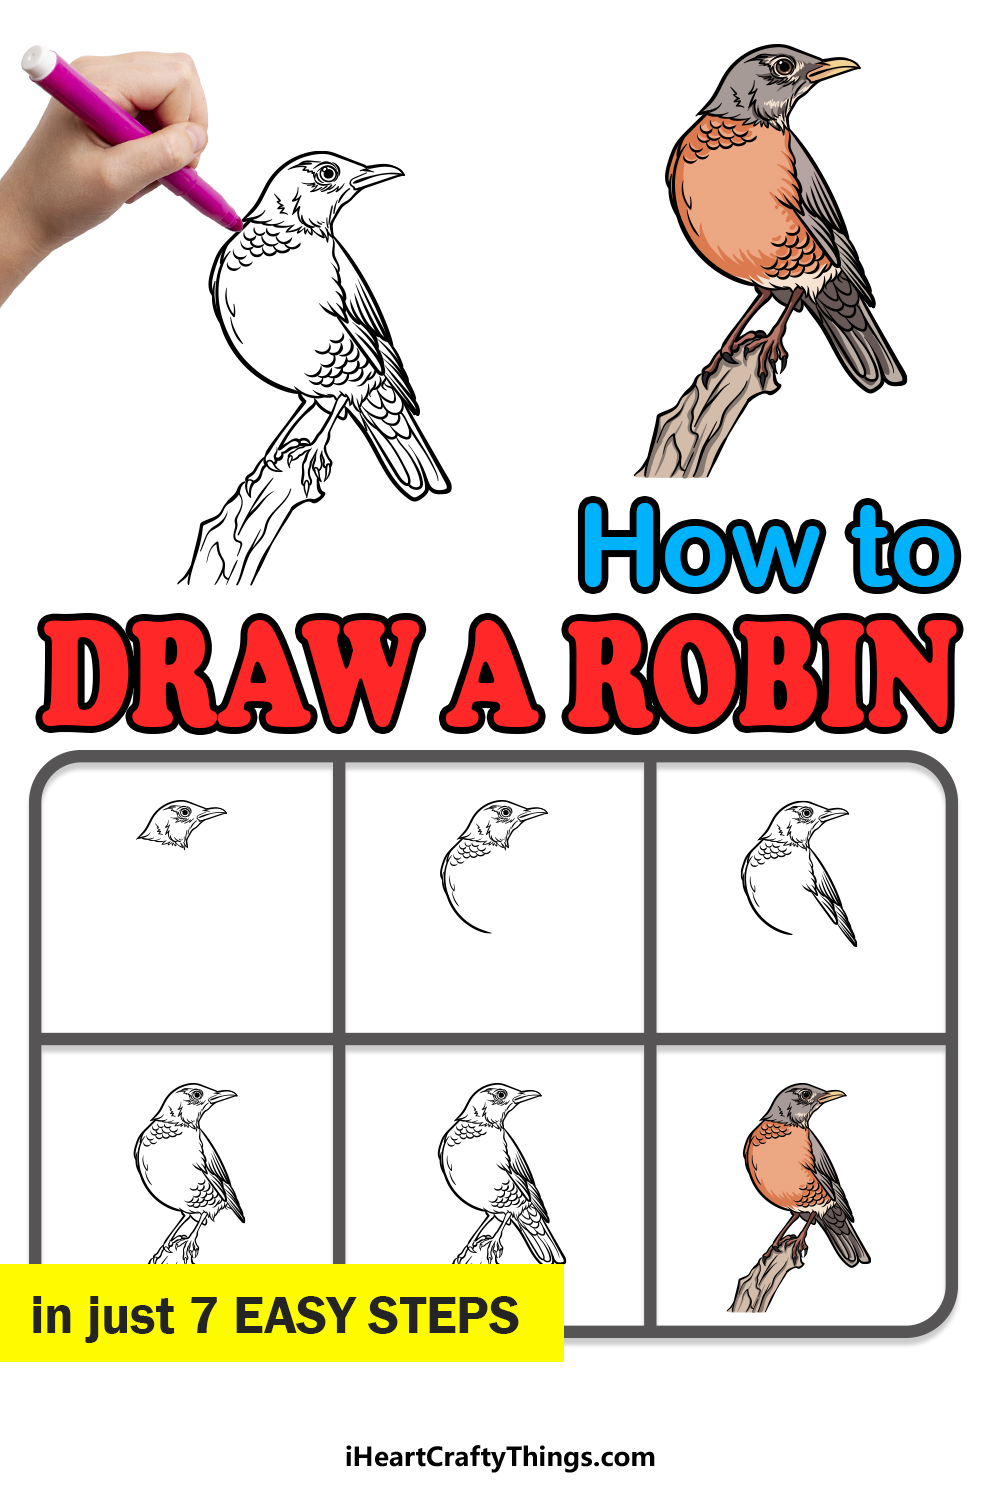 how to draw a Robin in 7 easy steps